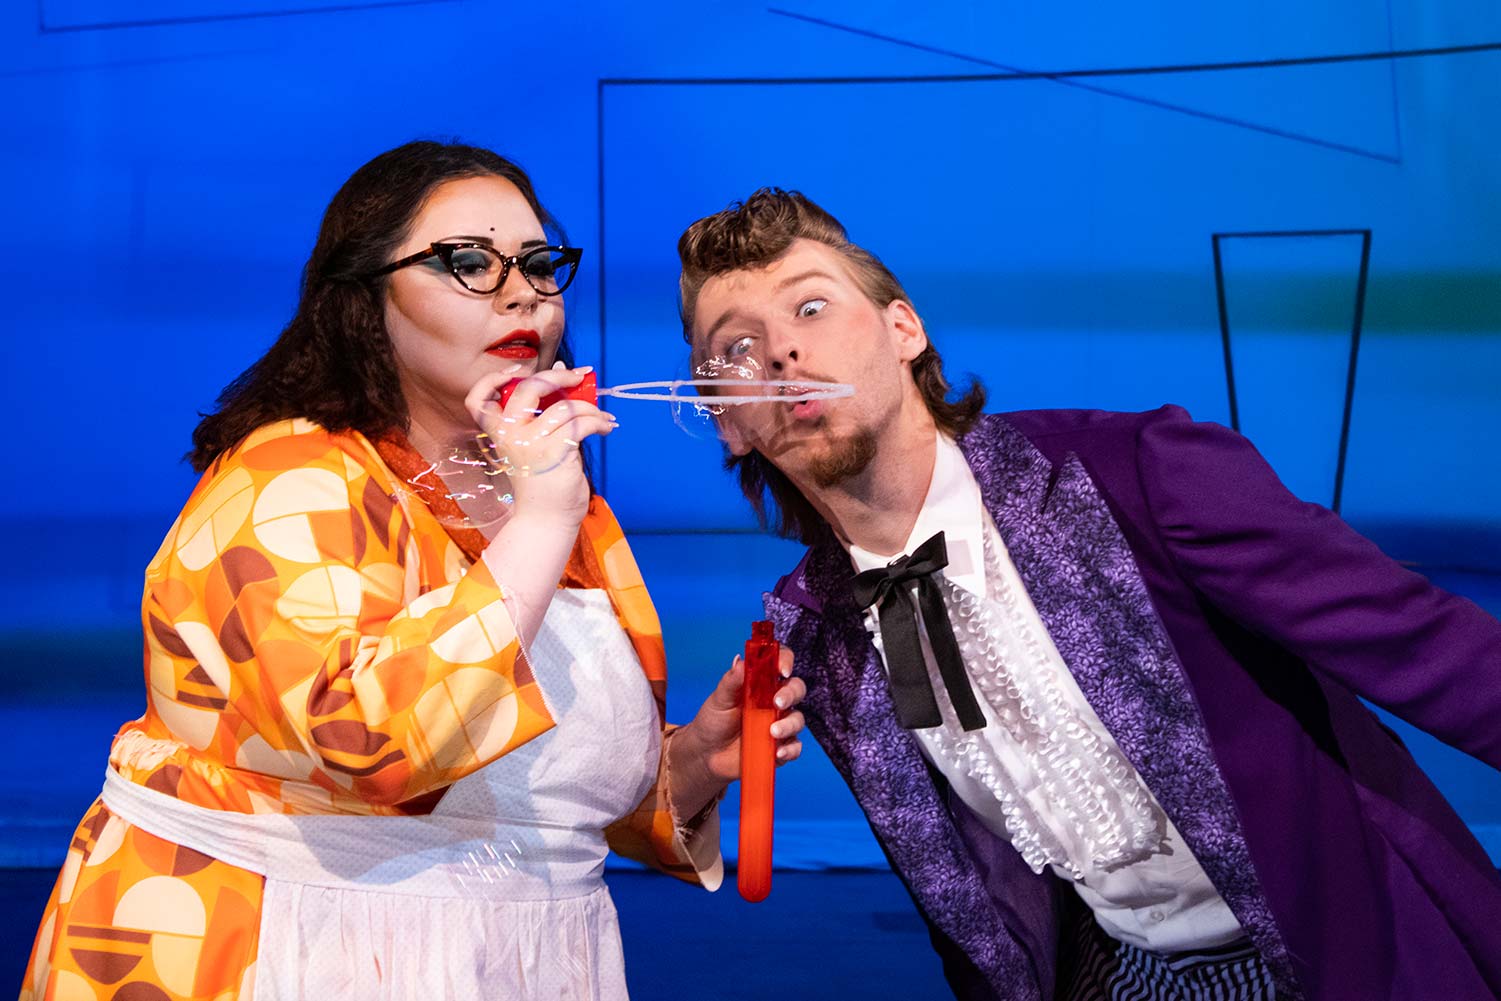 Angela Webb as Johanna Rugby and Luke Craddock as Abraham Slender blow bubbles, April 27. "Merry Wives of Windsor" is one of Shakespeare's comedies.